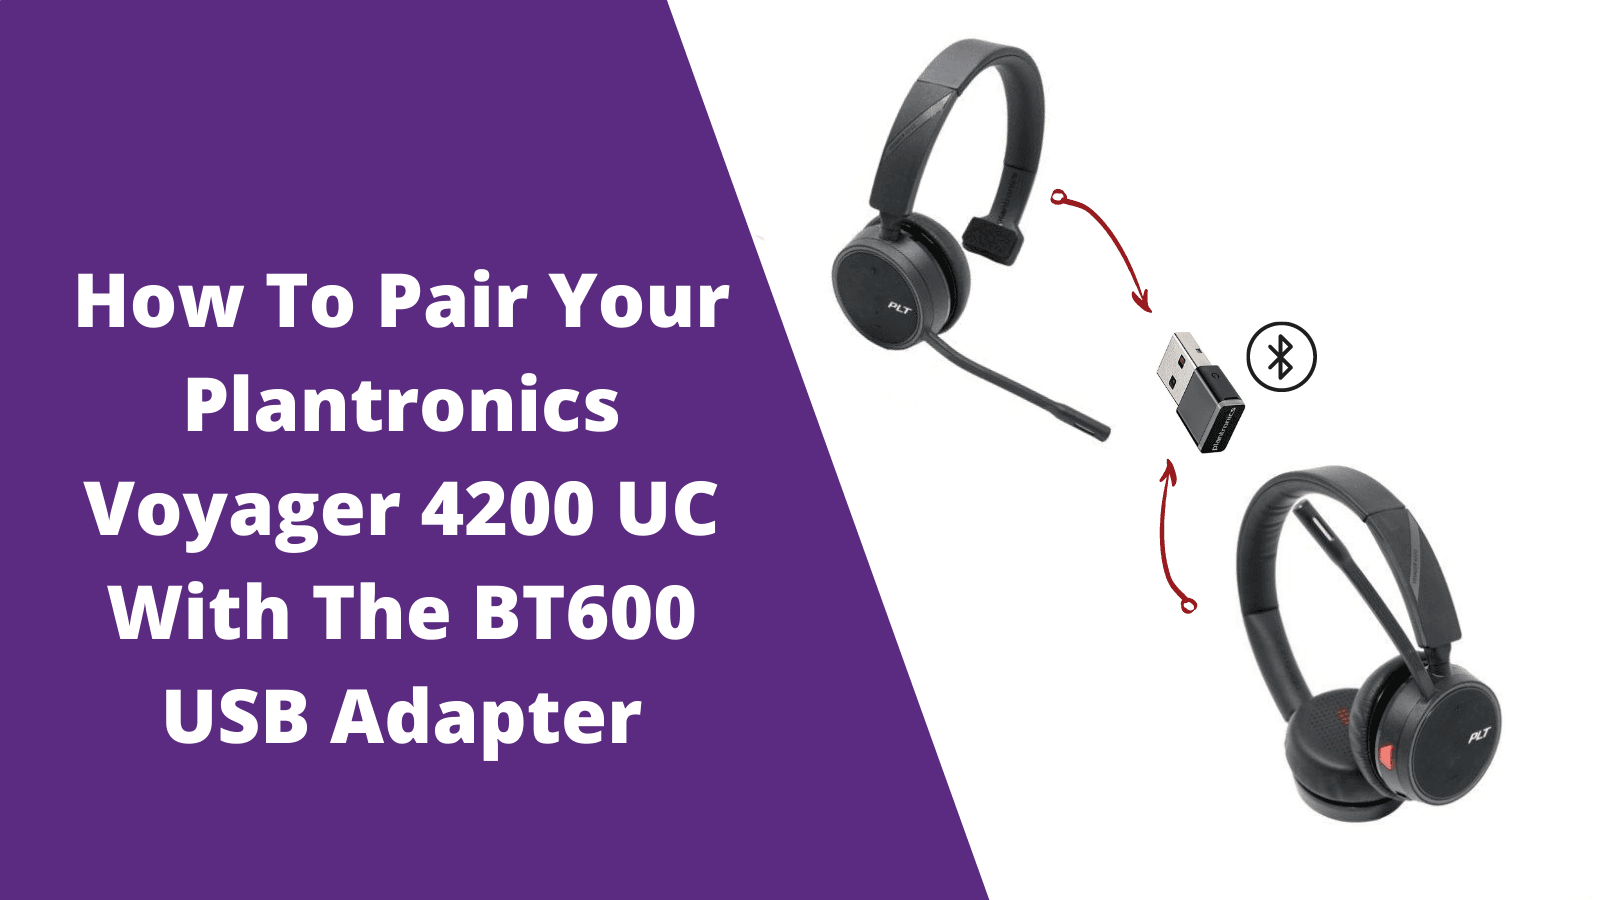 How To Pair Your Plantronics Voyager 4200 UC With The BT600 USB Adapter - Headset Advisor